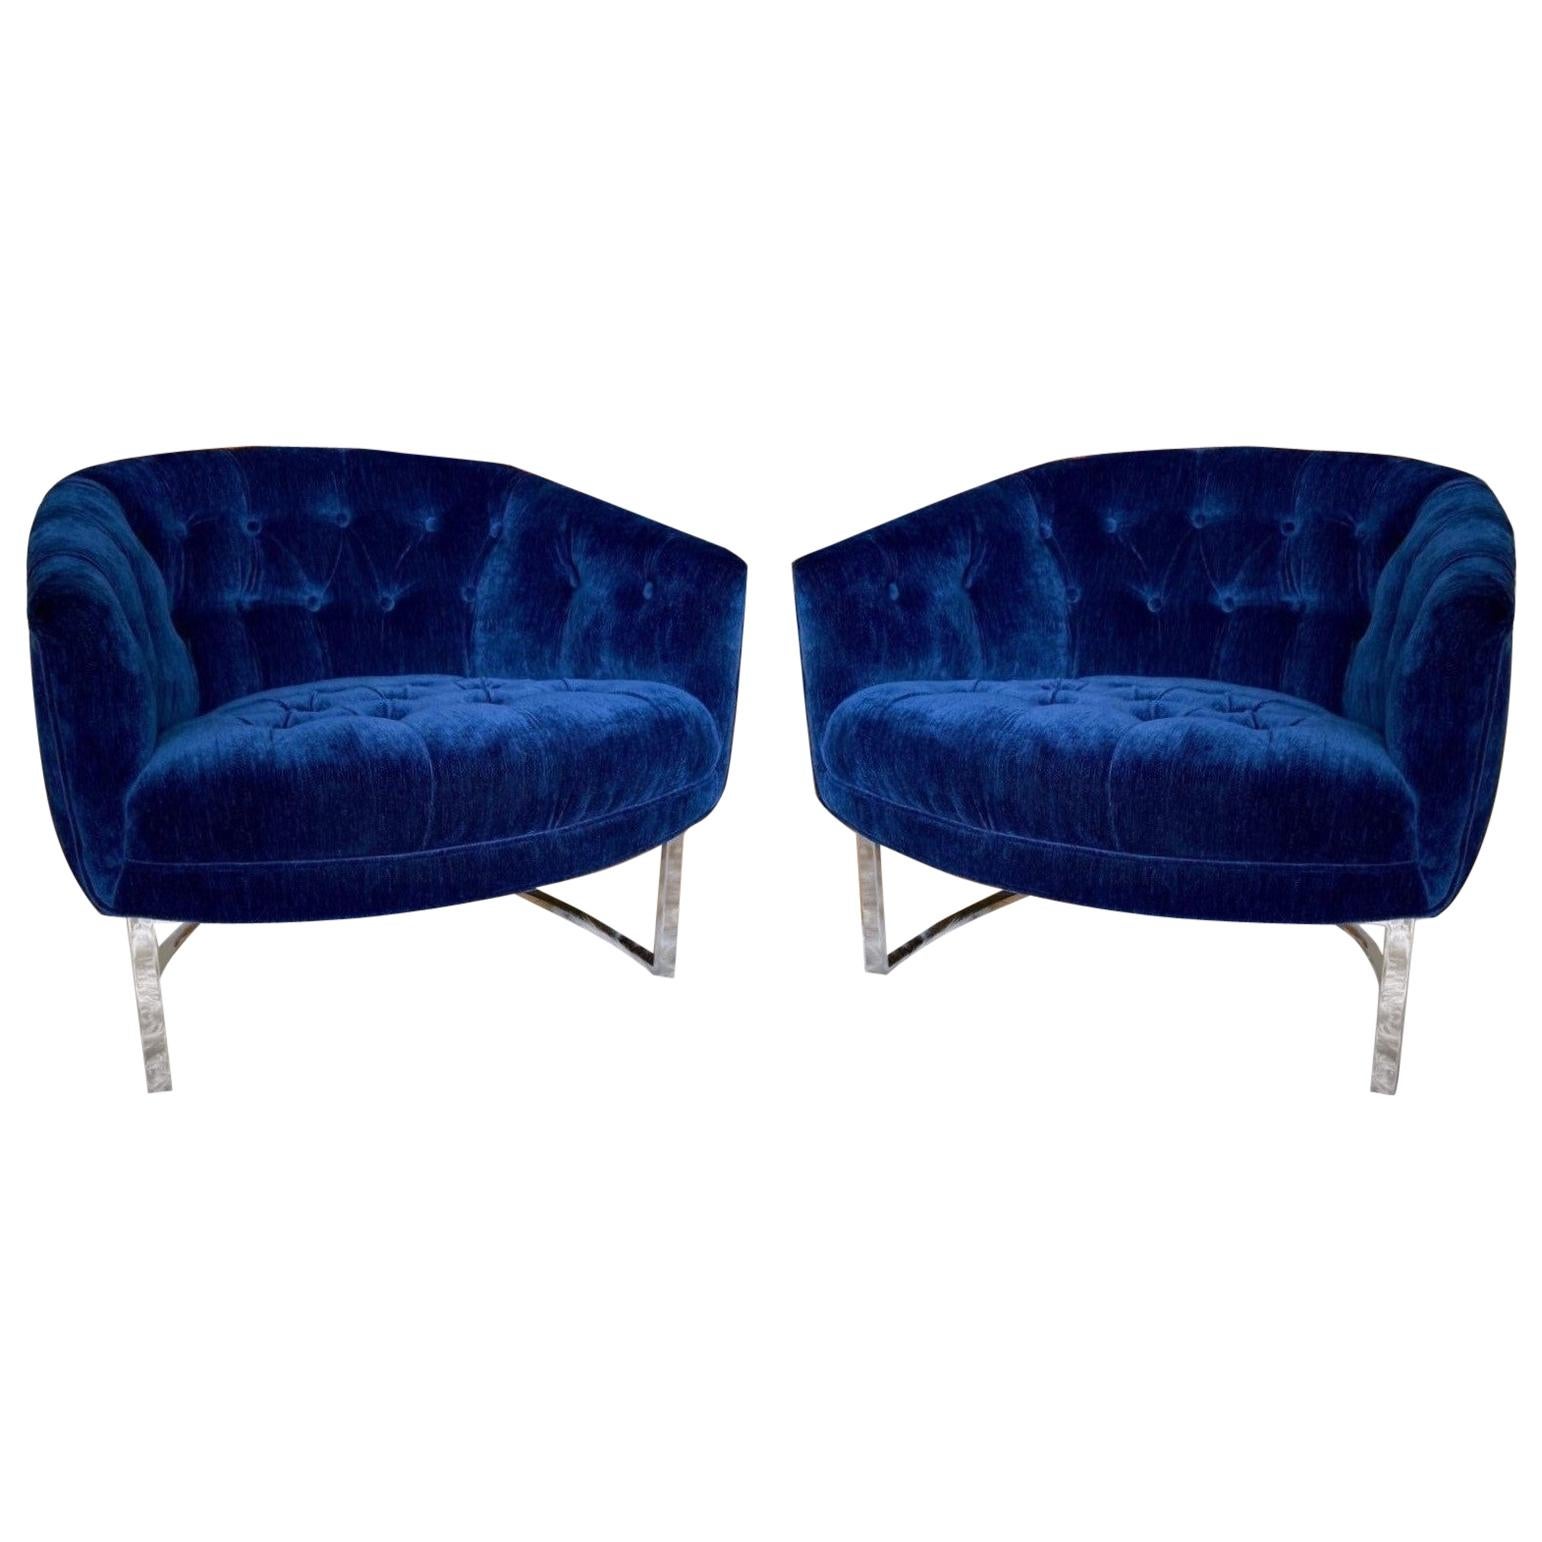 Pair of Milo Baughman Style Blue and Chromed Steel Framed Armchairs, 1970s For Sale